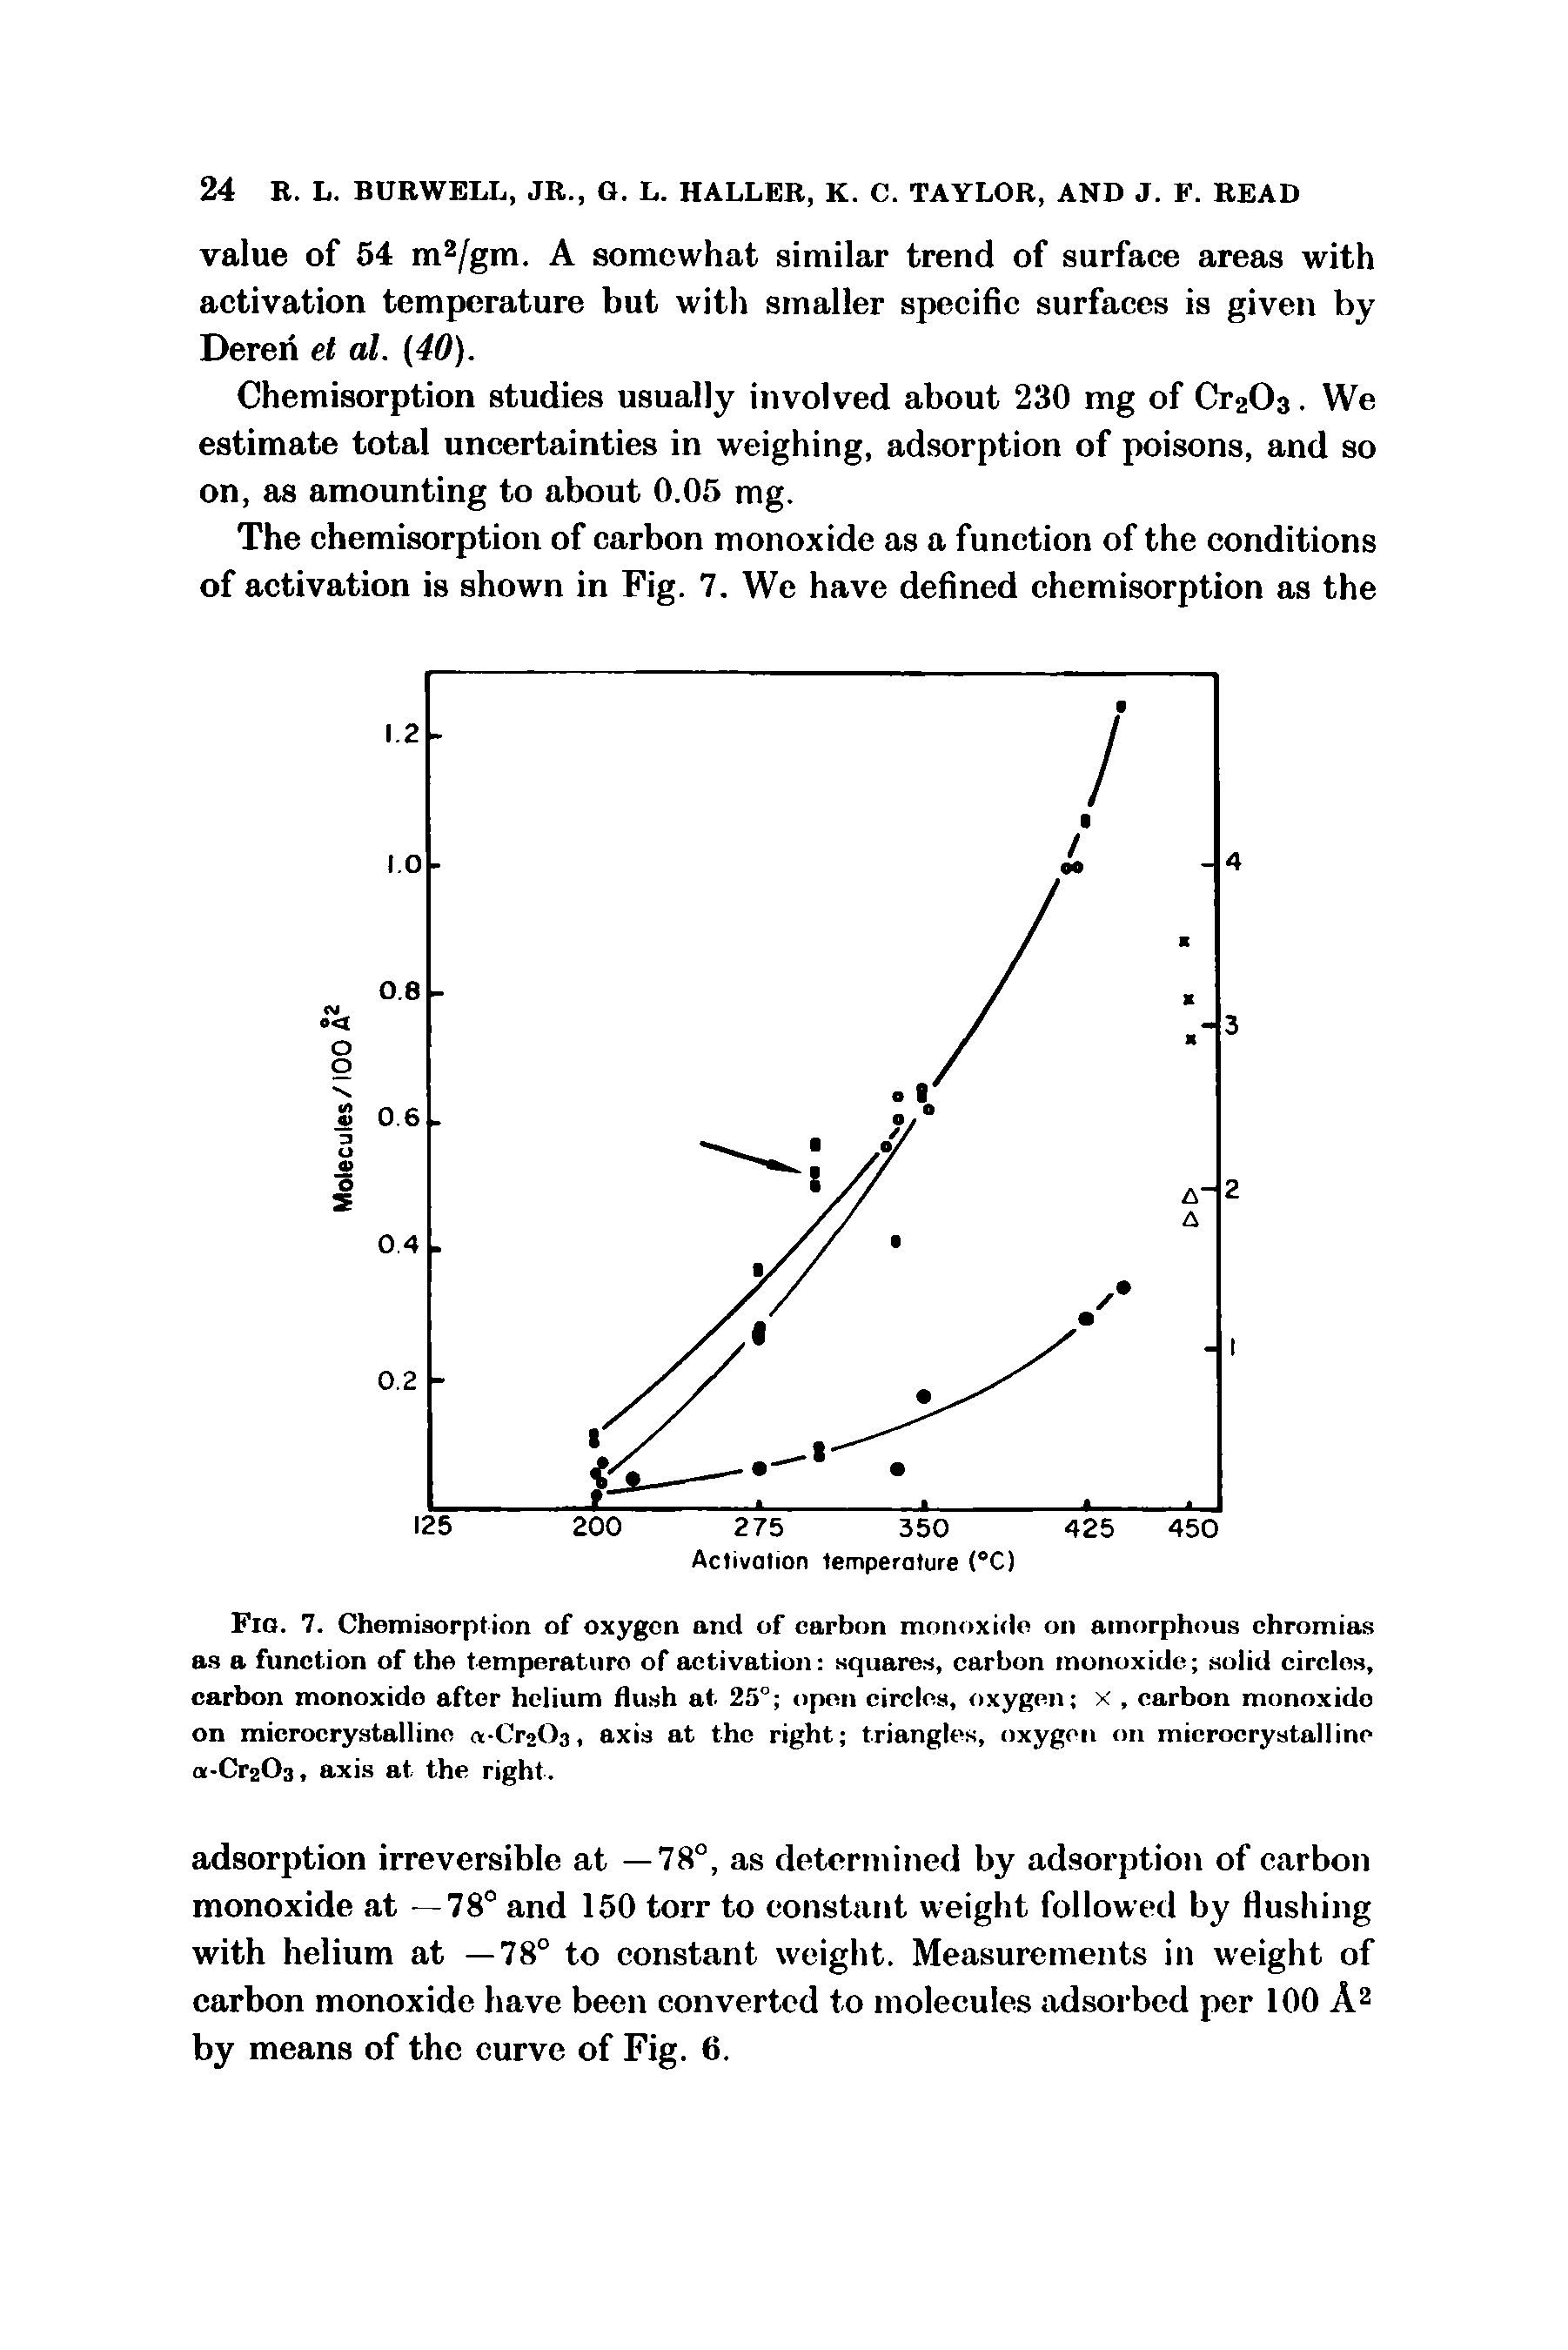 Fig. 7. Chemisorption of oxygen and of carbon monoxide on amorphous chromias as a function of the temperature of activation squares, carbon monoxide solid circles, carbon monoxide after helium flush at 25 open circles, oxygen x, carbon monoxide on microcrystalline rt Cr203, axis at the right triangles, oxygen on microcrystalline a-Cr203, axis at the right.